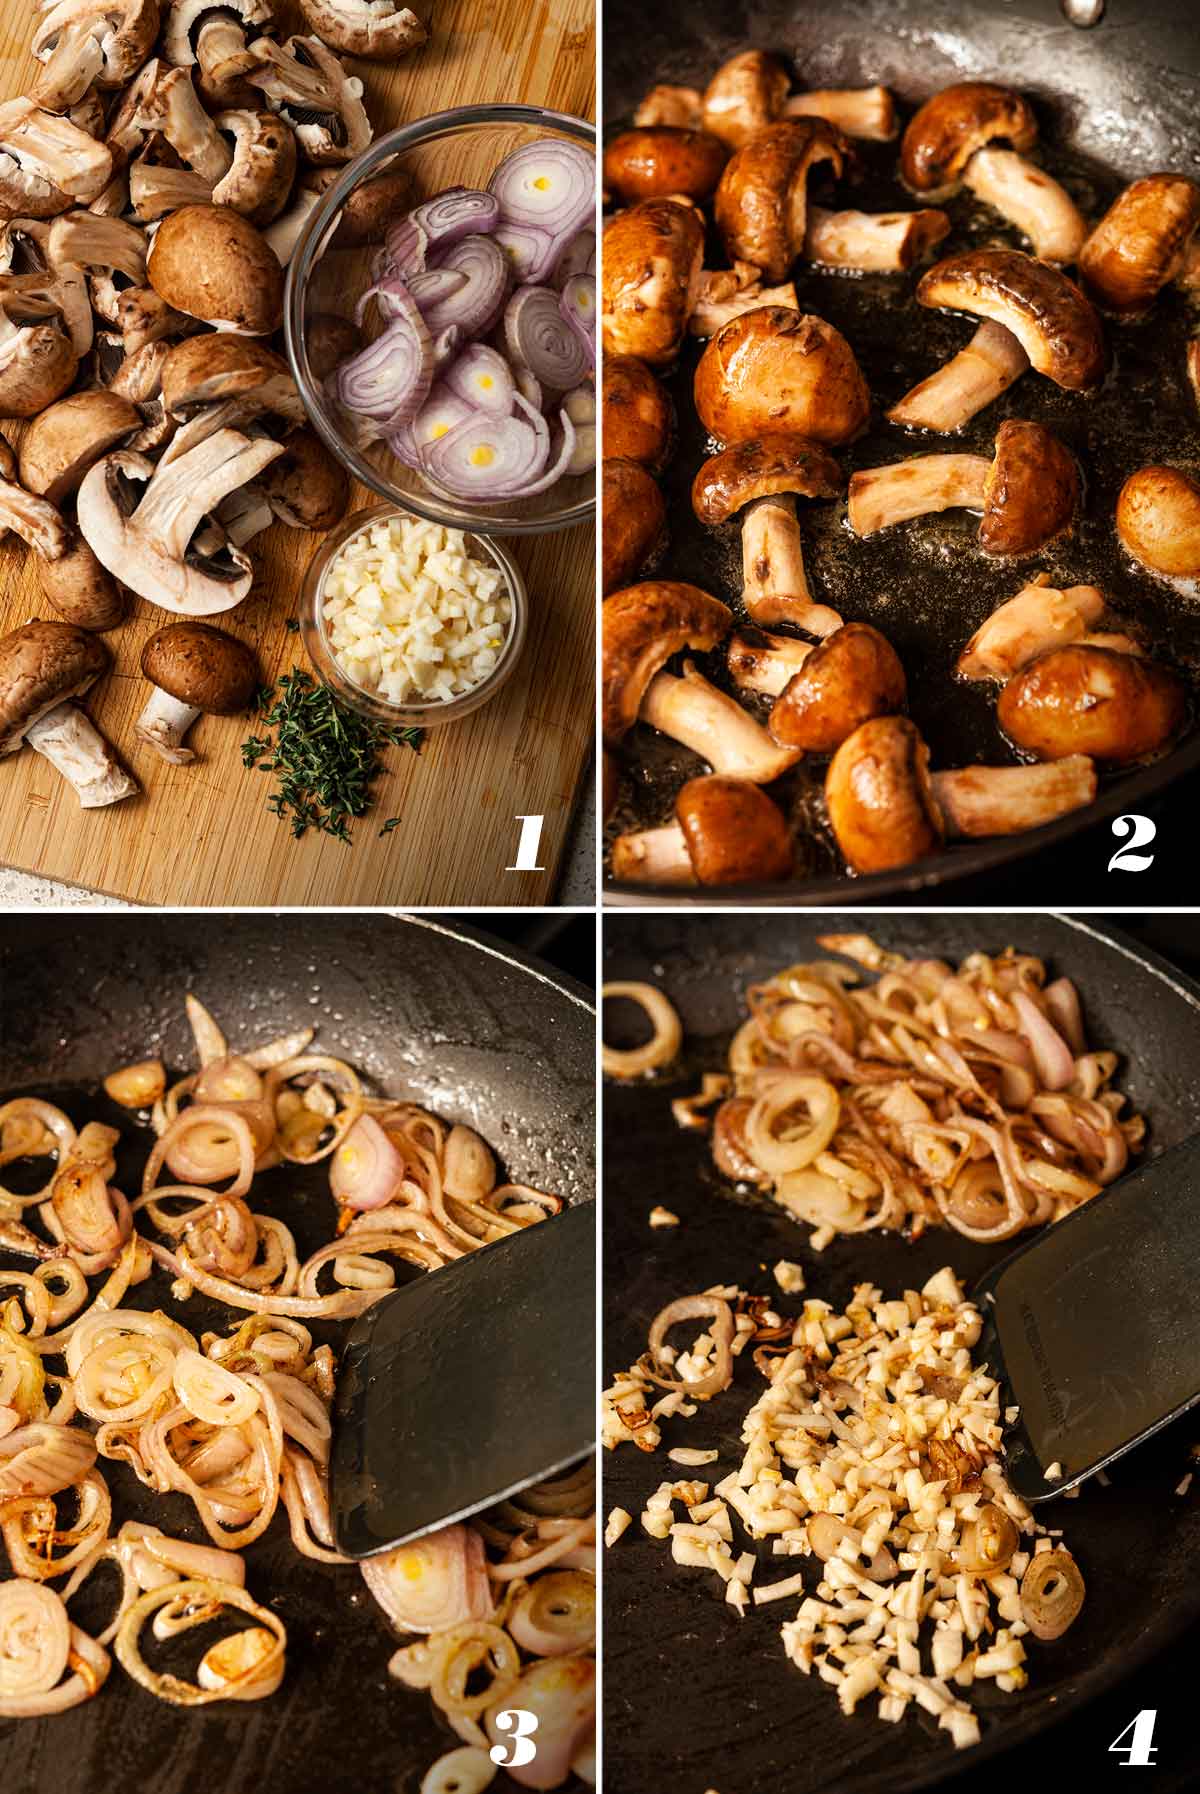 A collage of 4 numbered images showing how to prepare ingredients for white wine mushroom sauce.